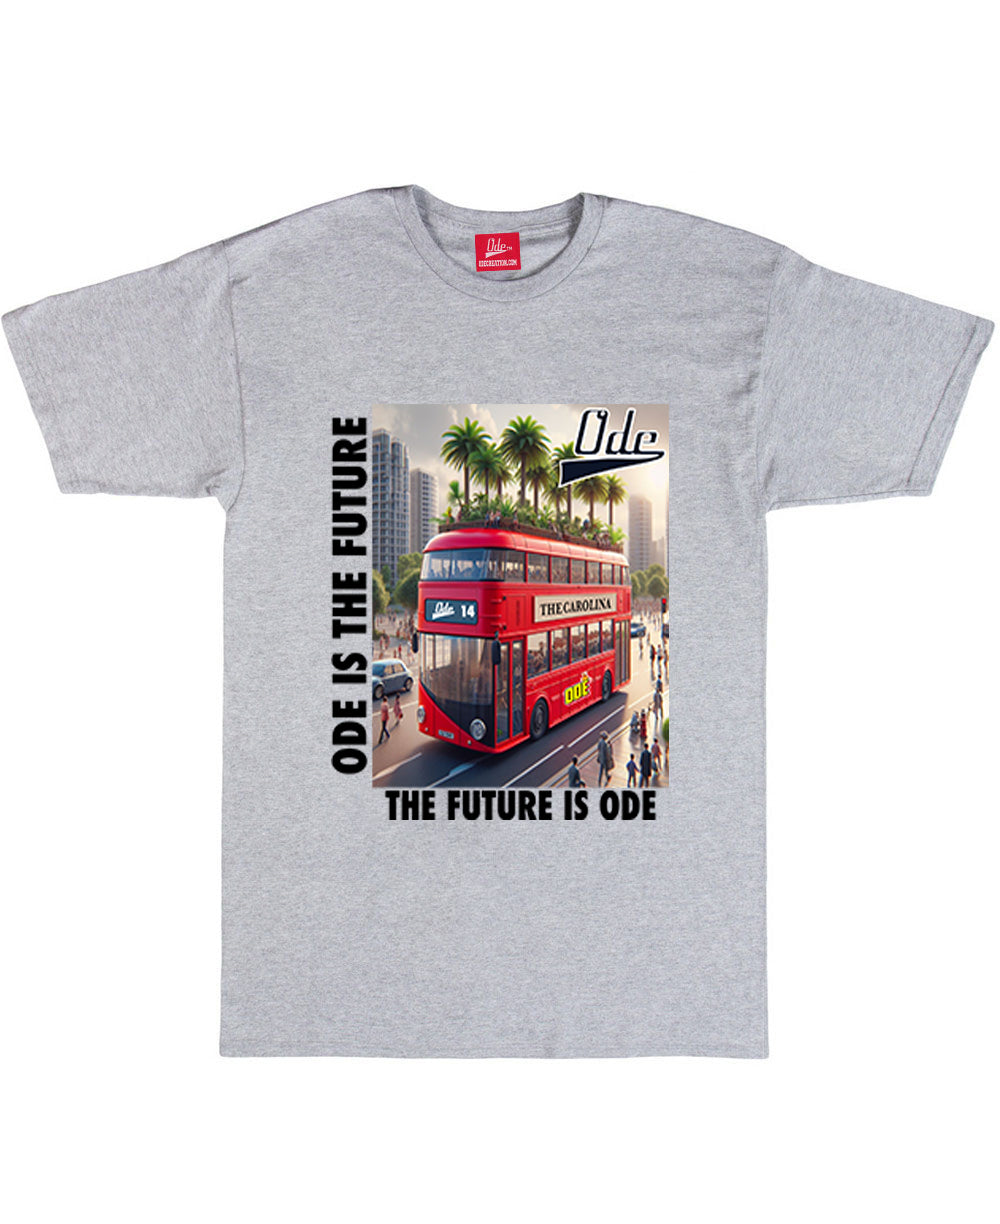 Ode Is The Future T-Shirt- Grey